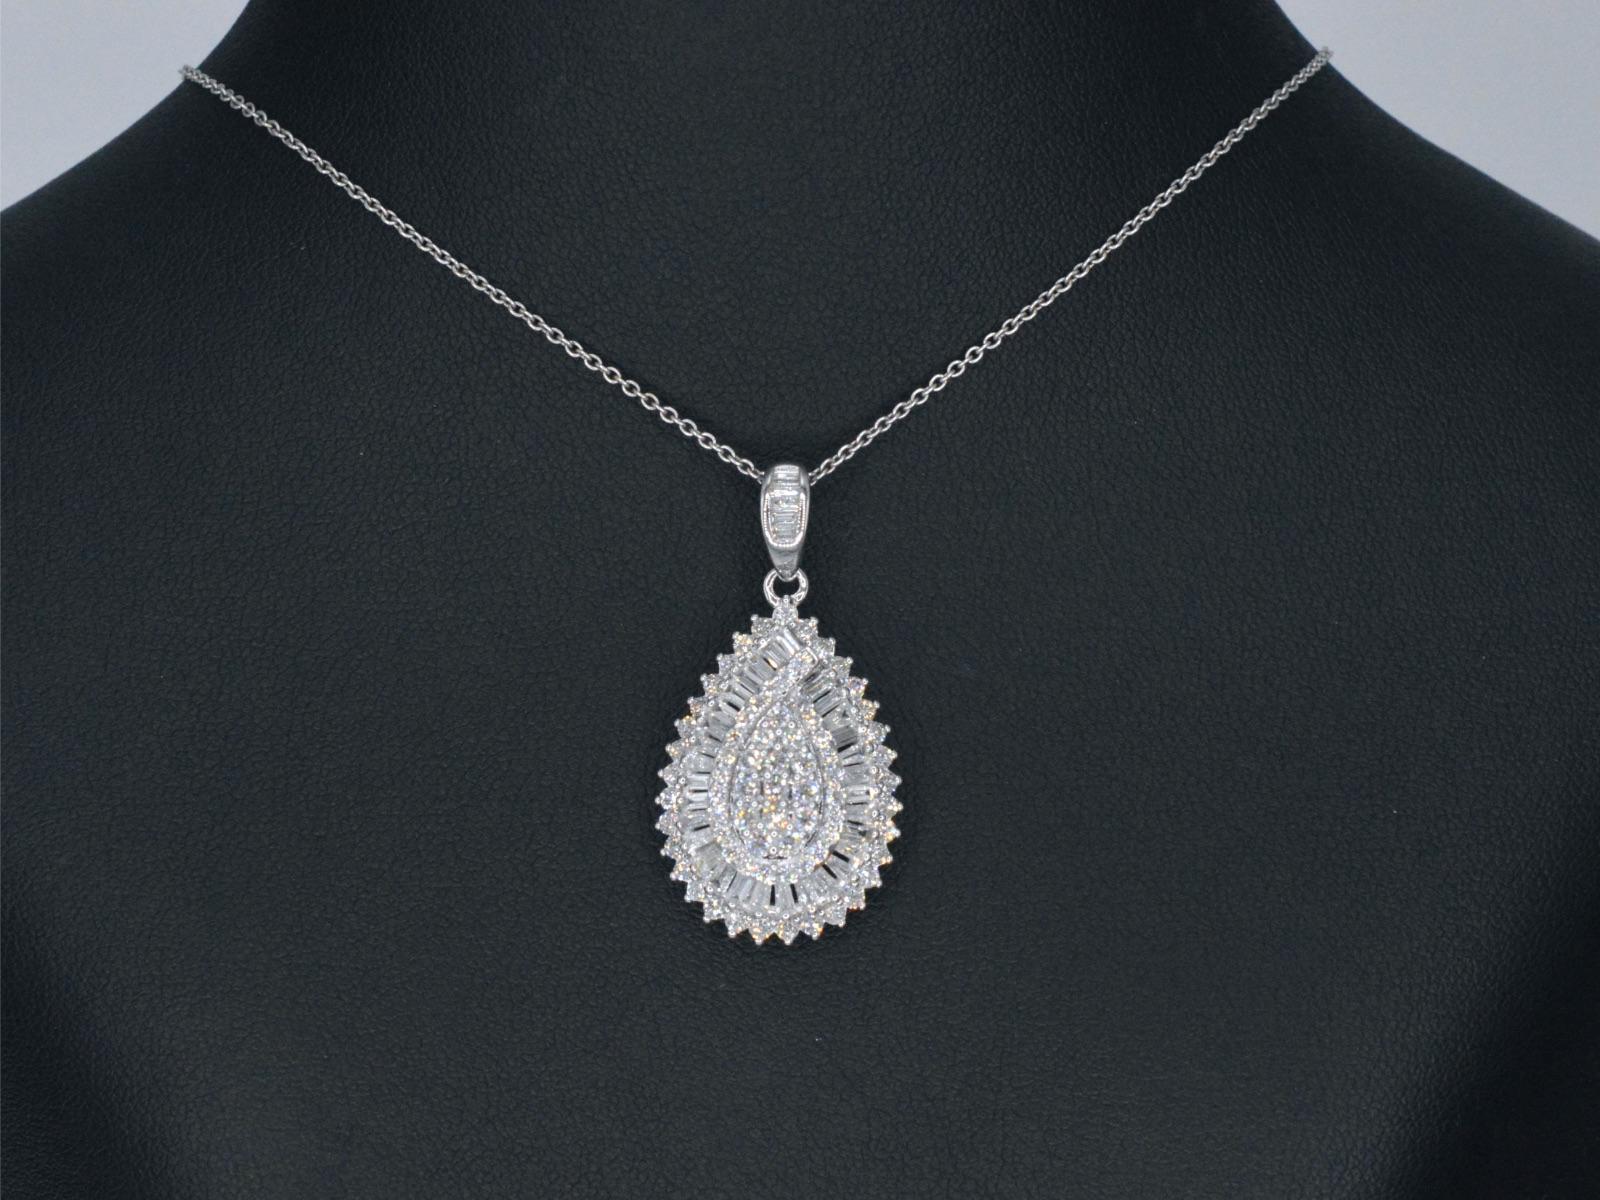 Diamonds: 108 pieces

Weight: 2.00 carats

Cut: Brilliant cut and Baguette cut

Colour: F-G

Clarity: SI

Quality: Very good

Jewel: Pendant (excl. necklace)

Weight: 5.5 gram

Hallmark: 14 karat 

Measurement: 18 x 33 cm

Condition: New

Retail